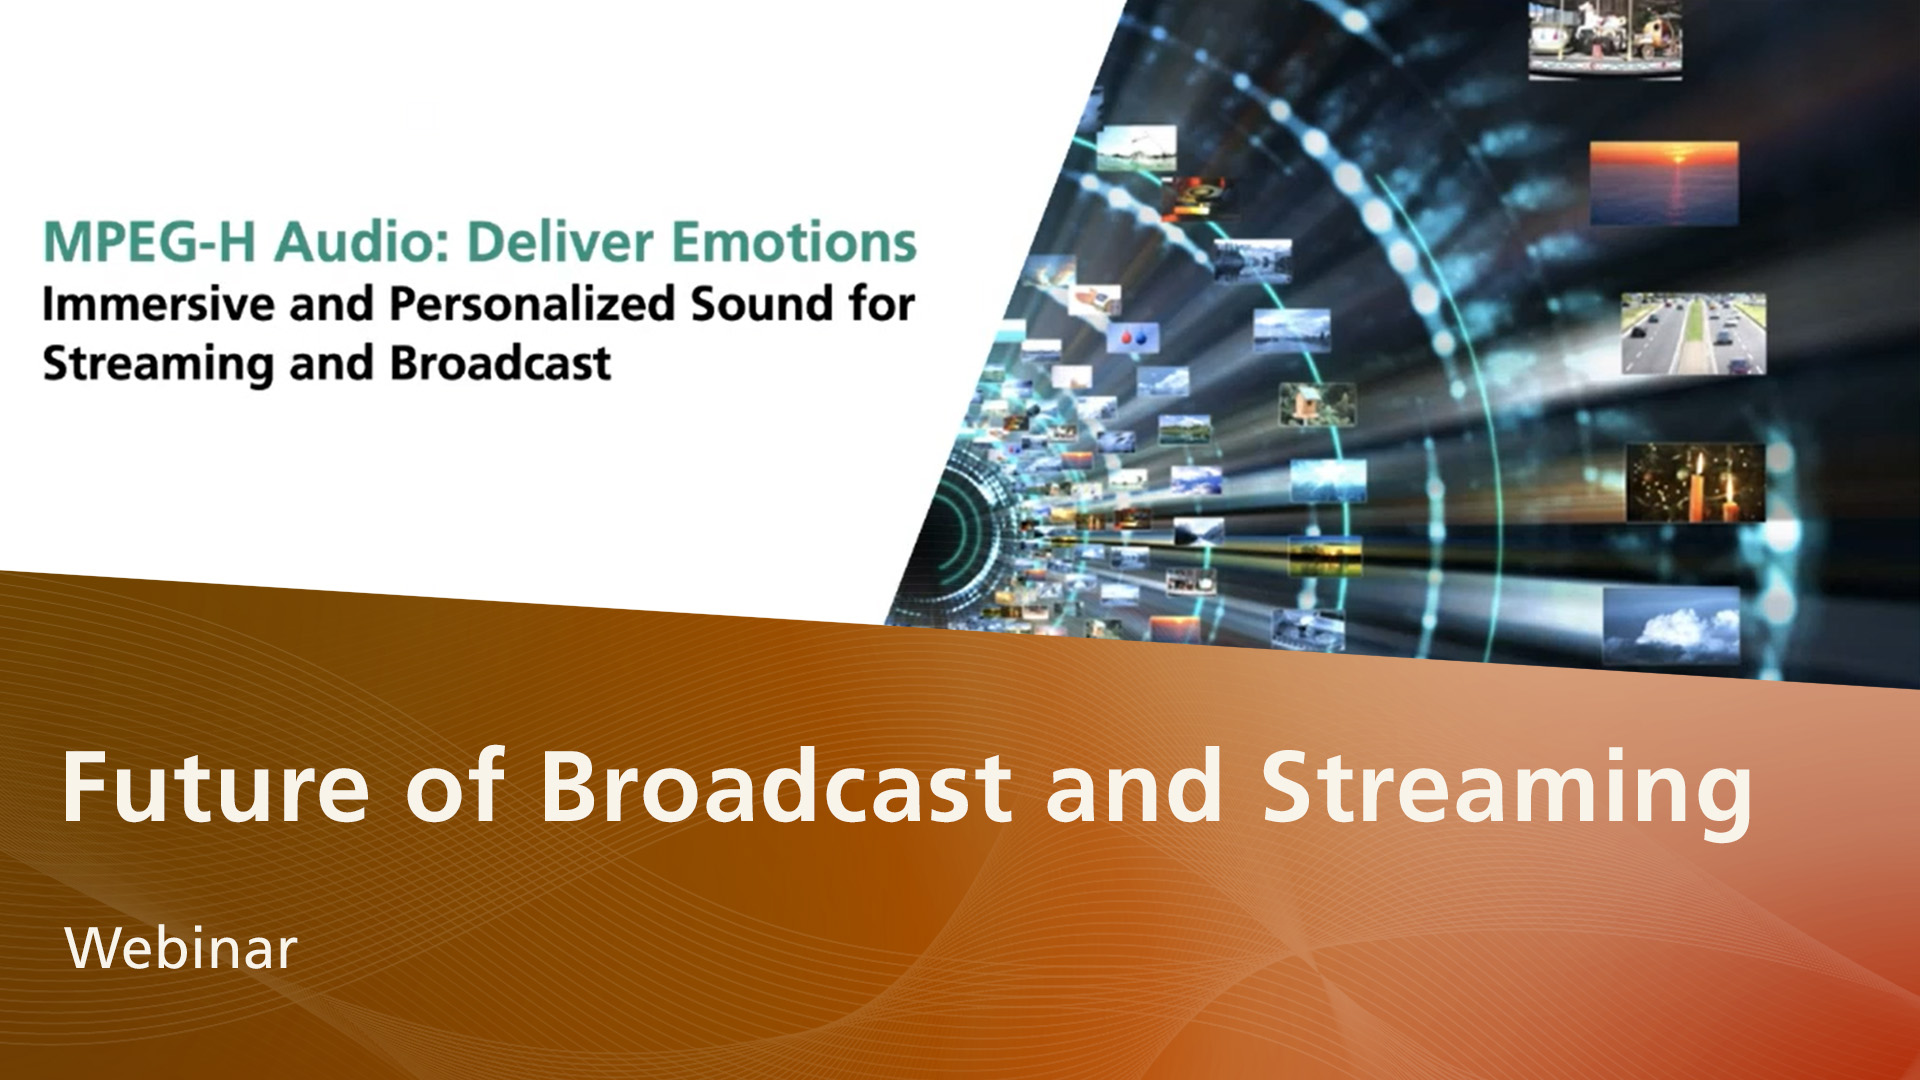 Video MPEG-H Audio Webinar Future of Broadcast and Streaming